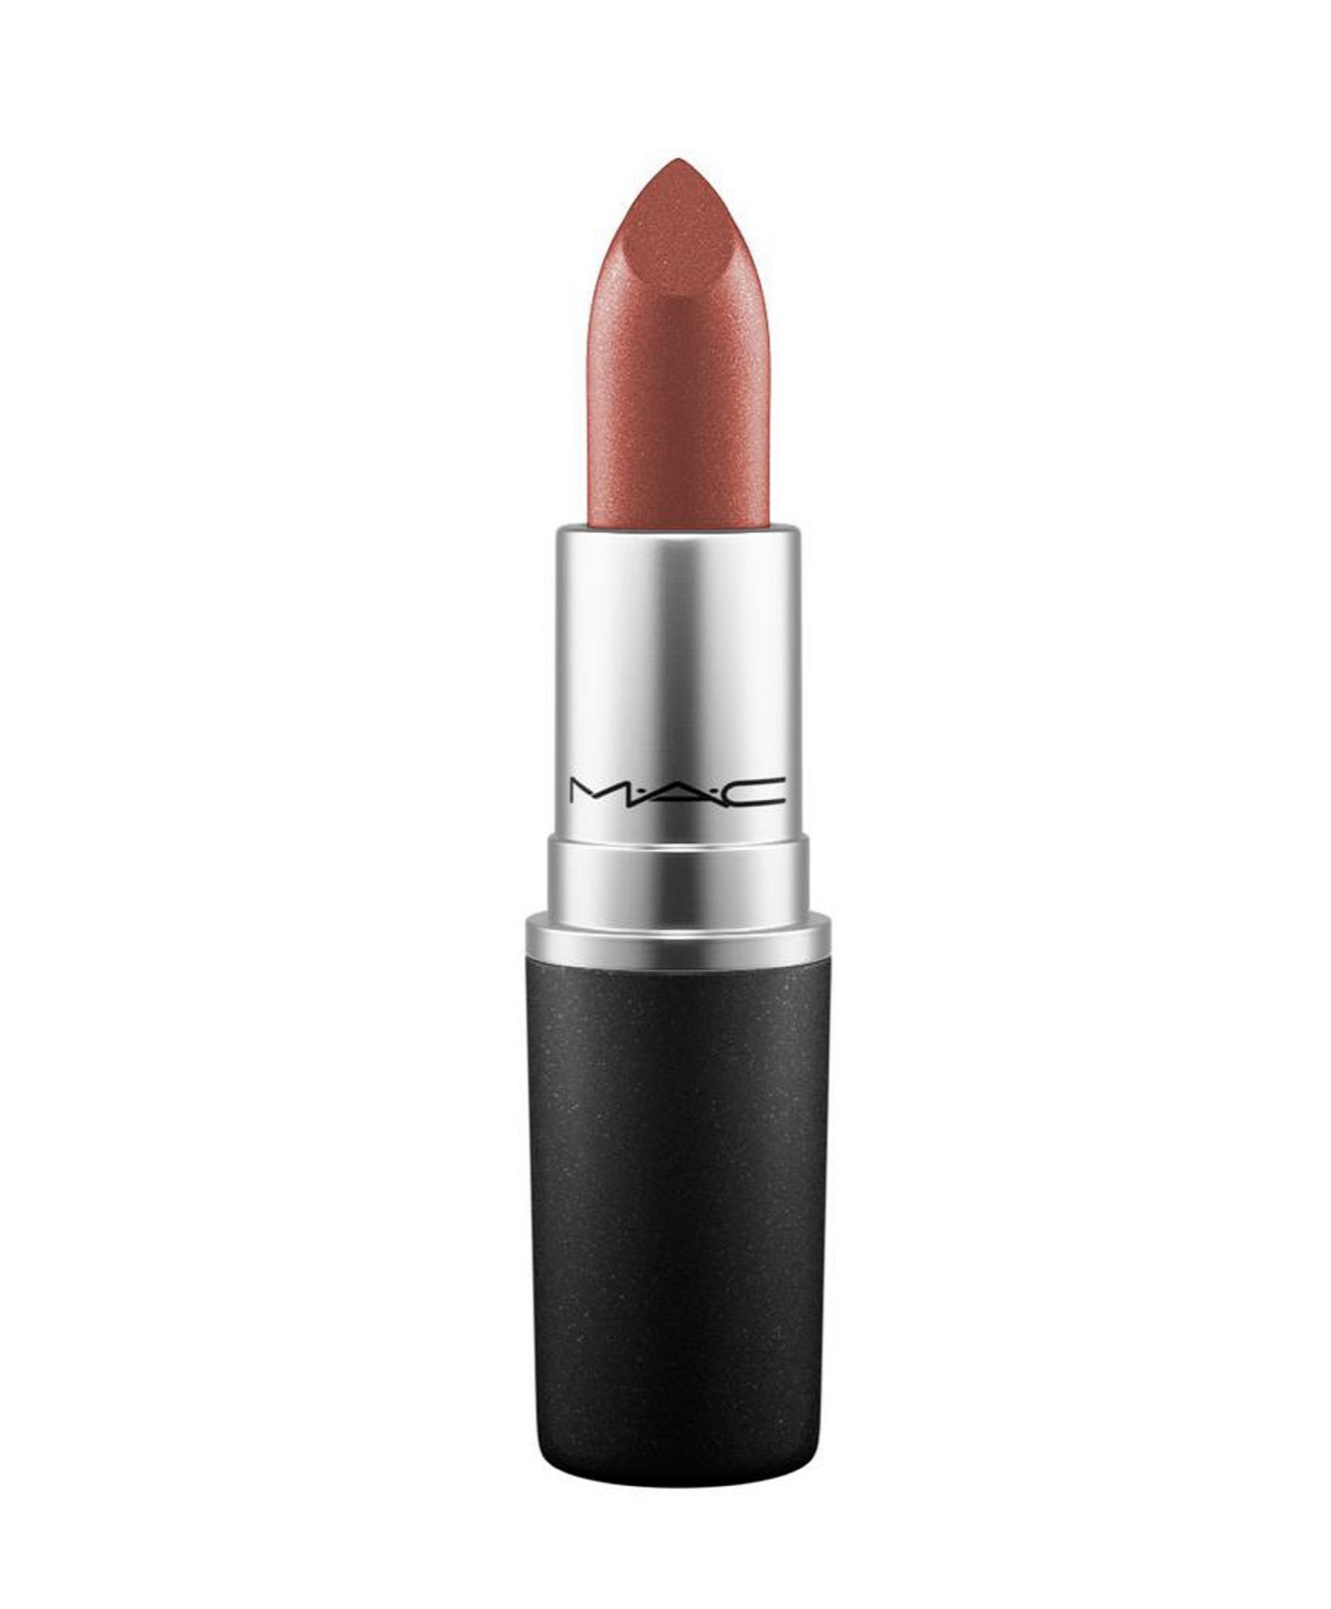   / MAC -    Frost lipstick Rouge A Levres  309 Fresh Maroccan 3 